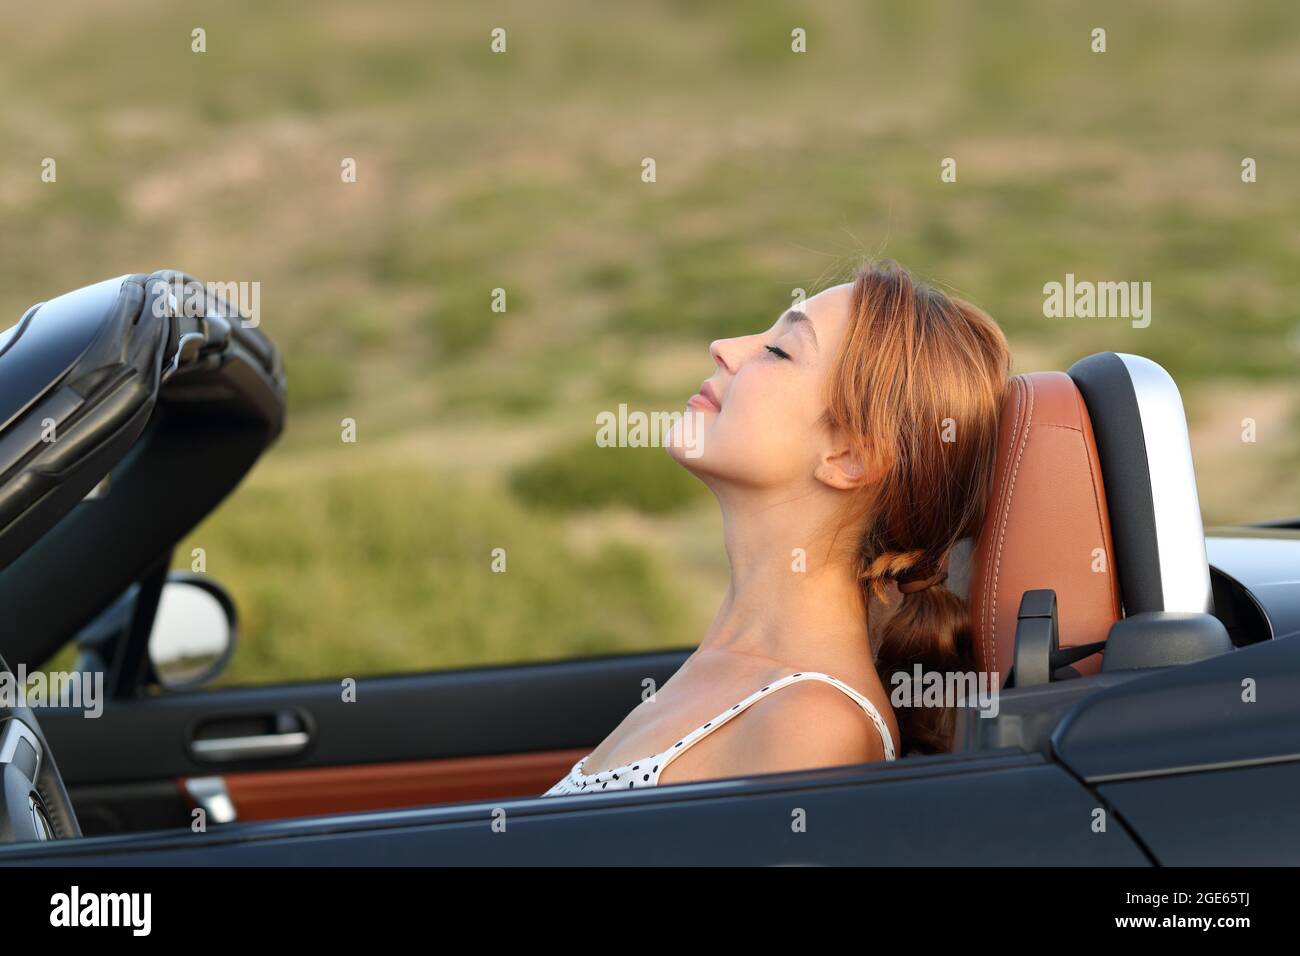 Profile of a woman breathing fresh air in a convertible car Stock Photo